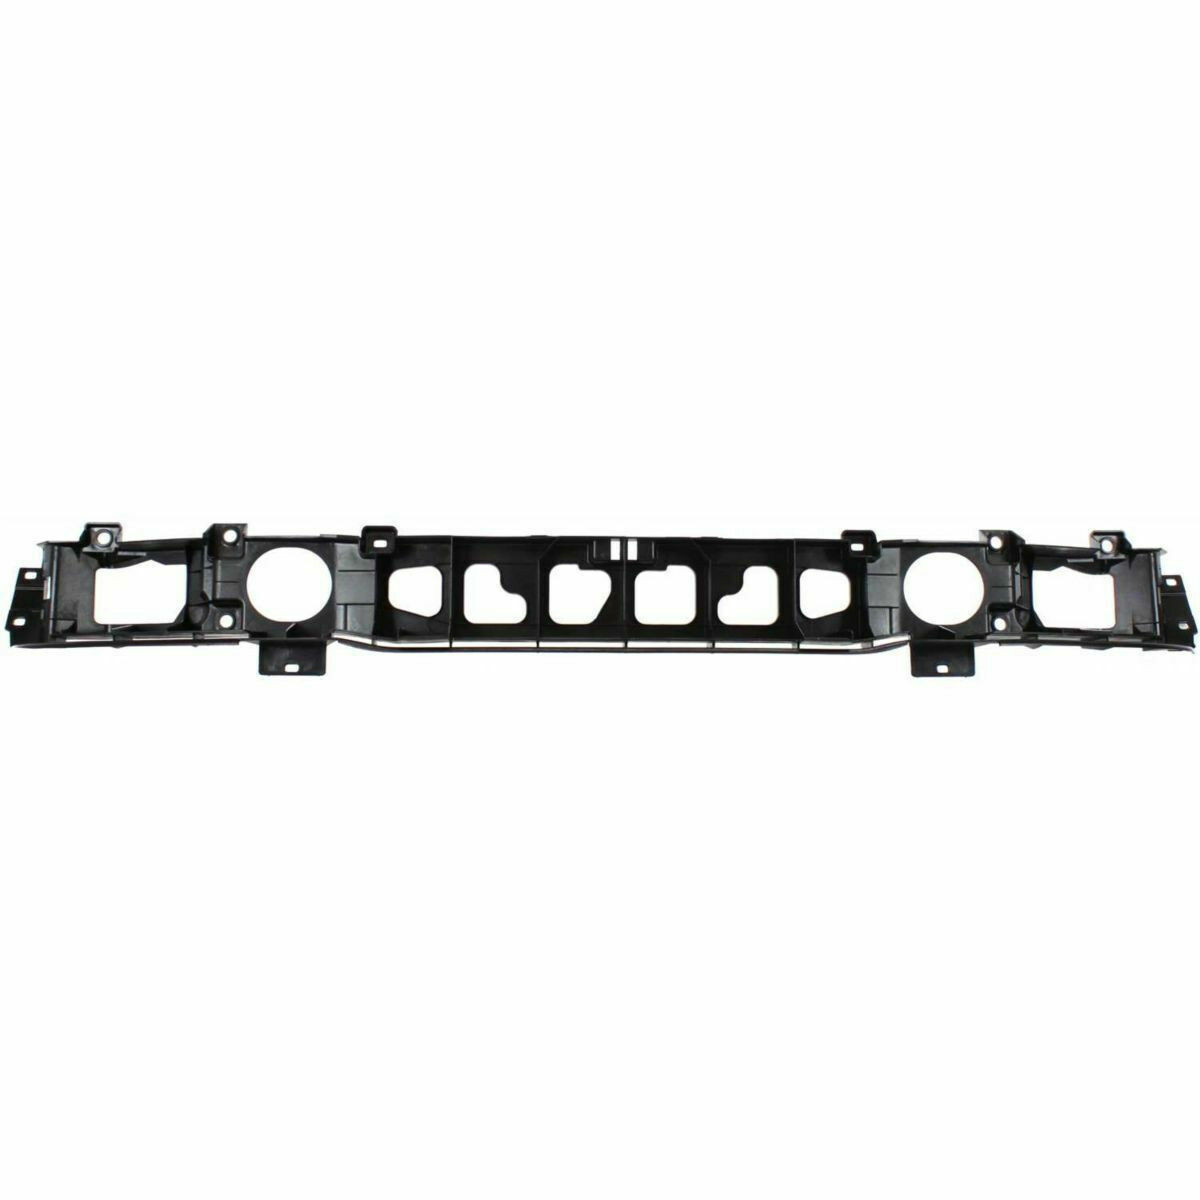 New Header Panel Fits 1992-1995 Ford Taurus Except SHO Model FO1221118